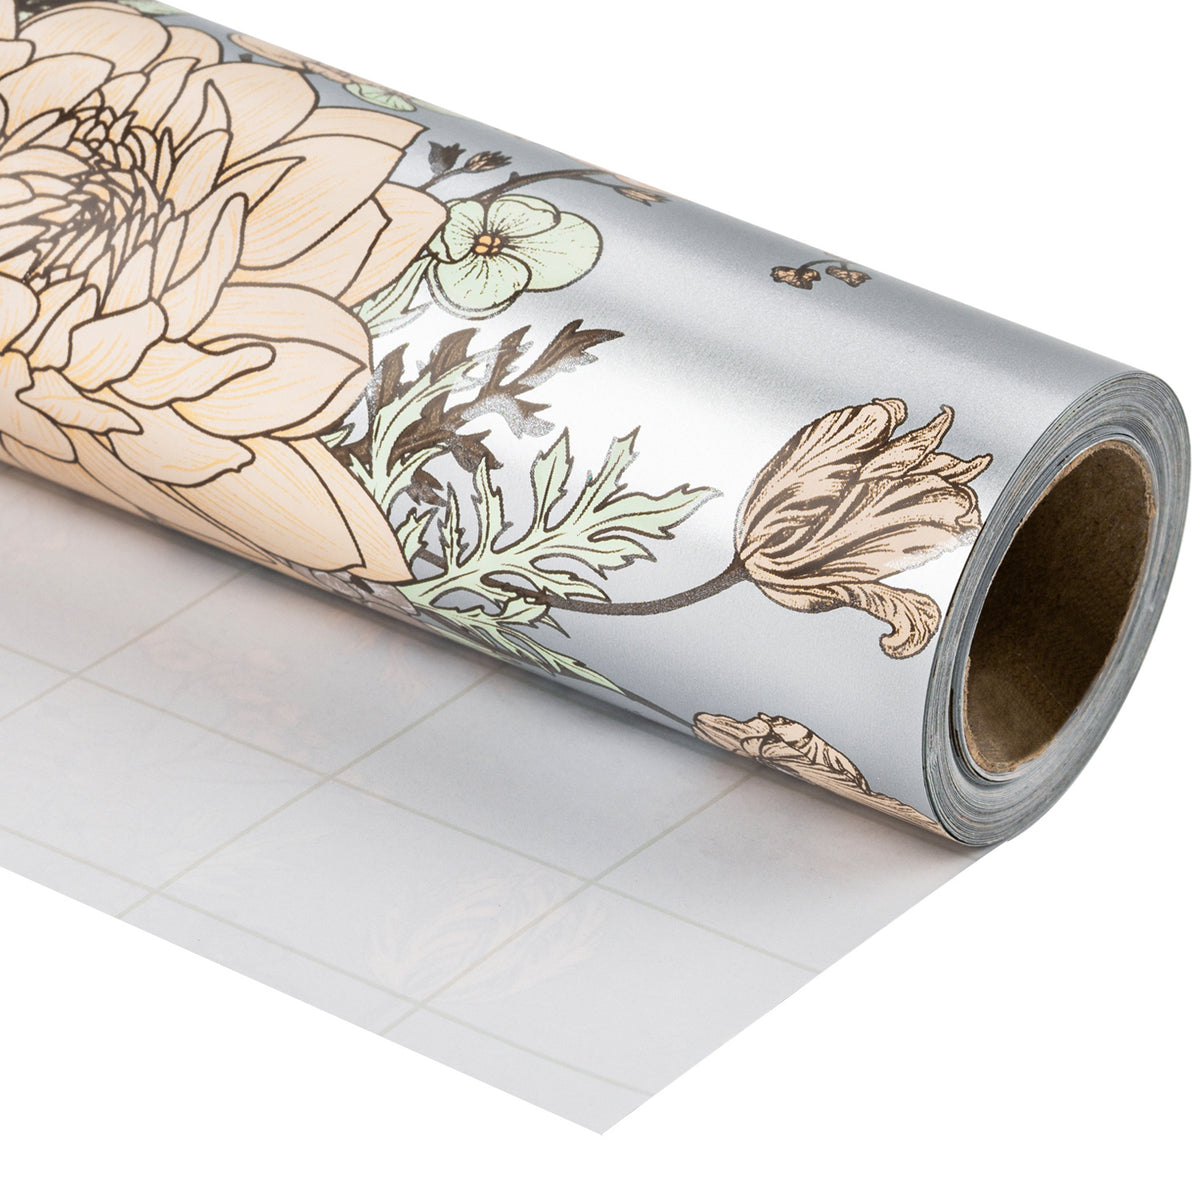 WRAPAHOLIC Wrapping Paper Roll - Elegant White for Birthday, Holiday, Wedding, Baby Shower Wrap - 30 inch x 16.5 Feet